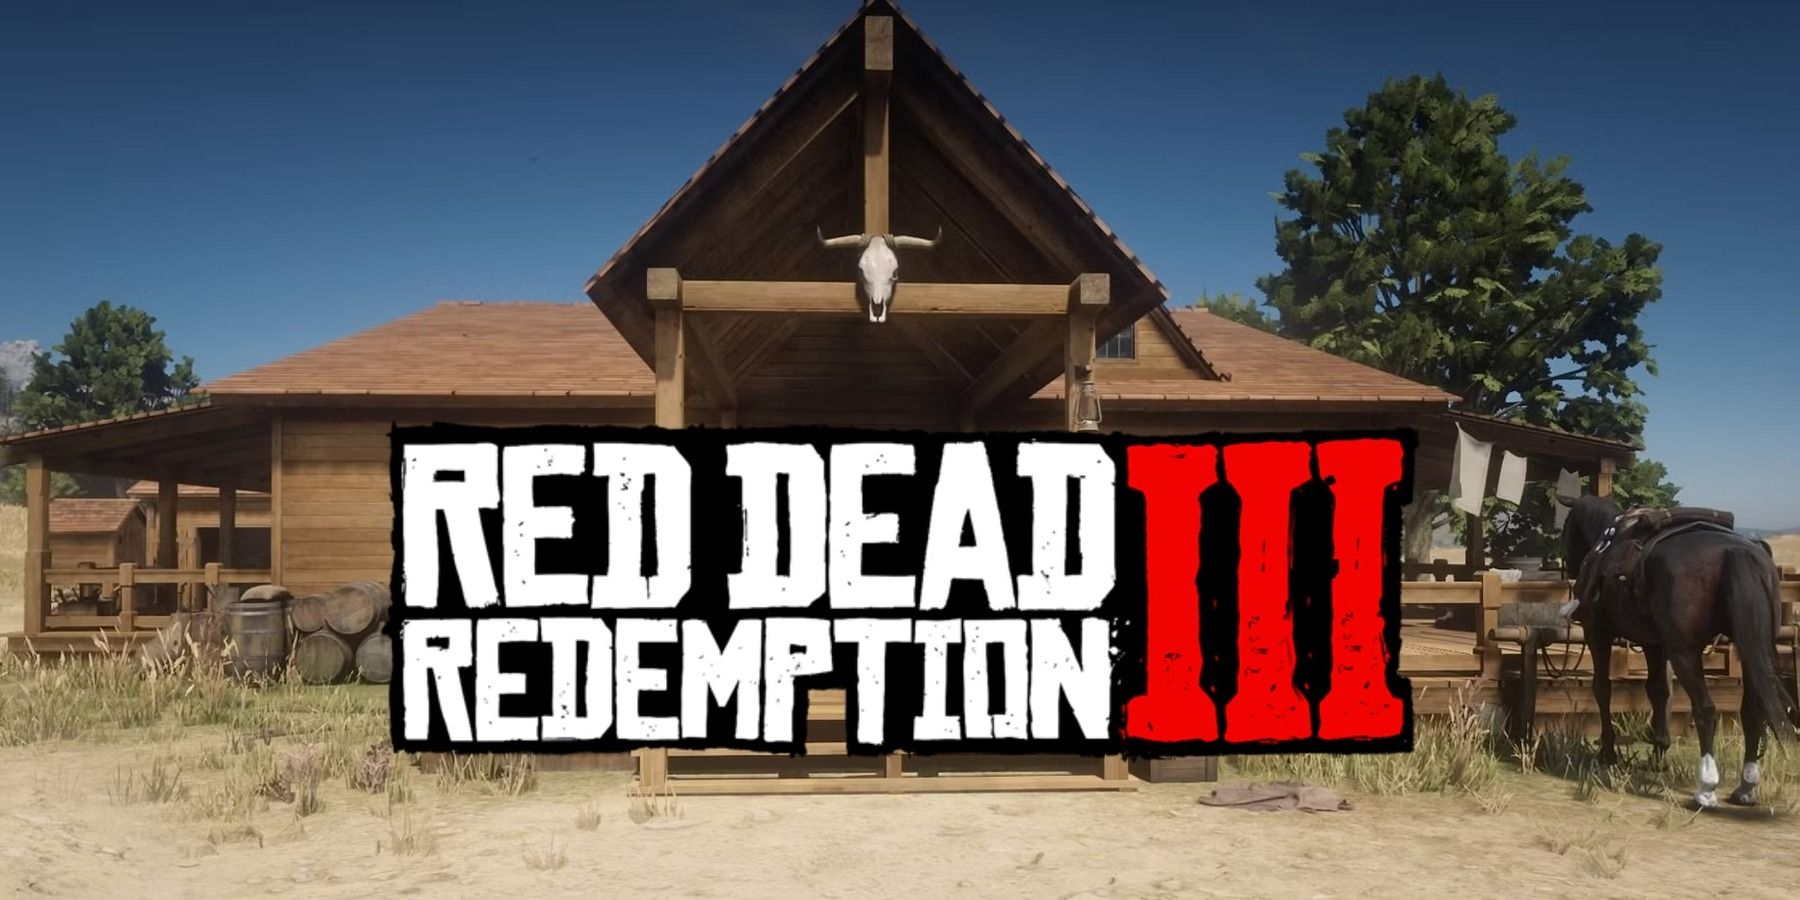 Red Dead Redemption House